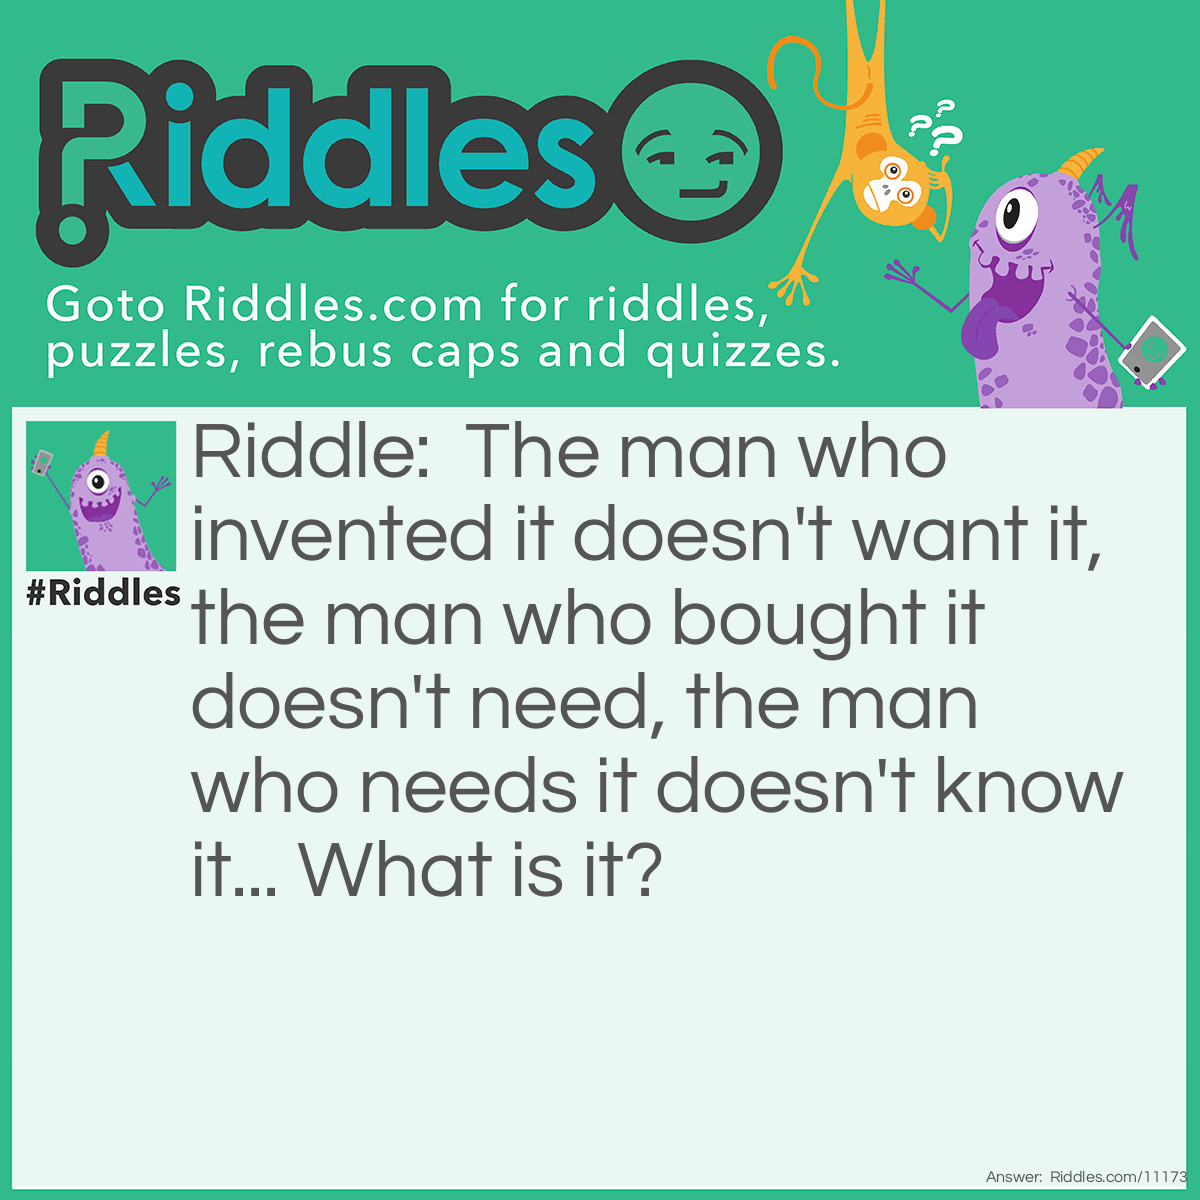 Riddle: The man who invented it doesn't want it, the man who bought it doesn't need, the man who needs it doesn't know it... What is it? Answer: A coffin or casket.